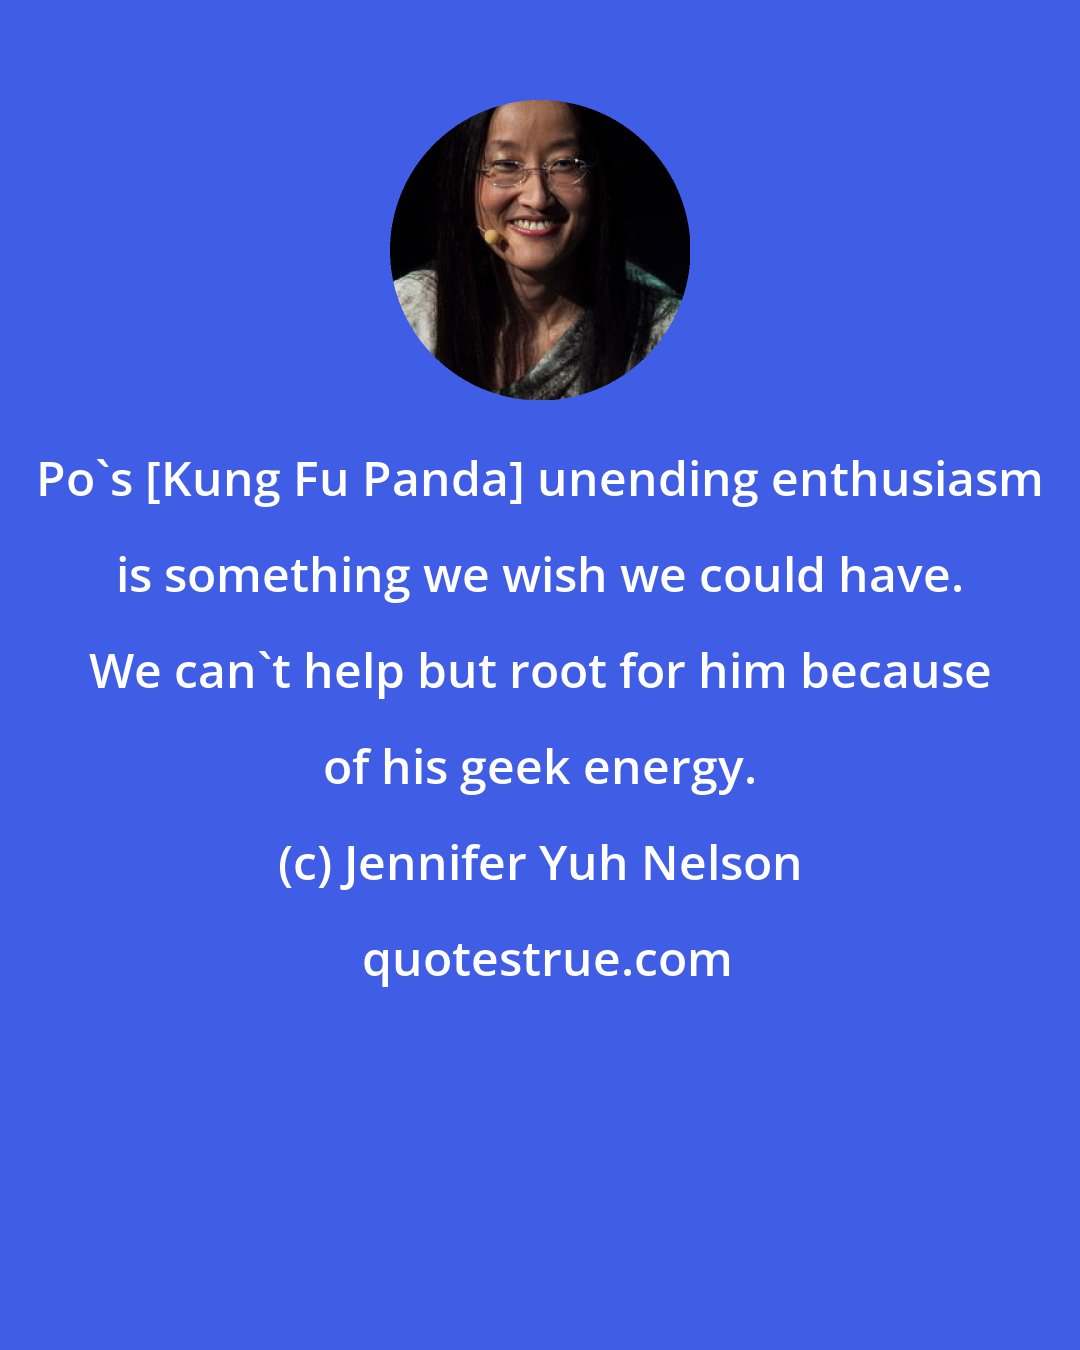 Jennifer Yuh Nelson: Po's [Kung Fu Panda] unending enthusiasm is something we wish we could have. We can't help but root for him because of his geek energy.